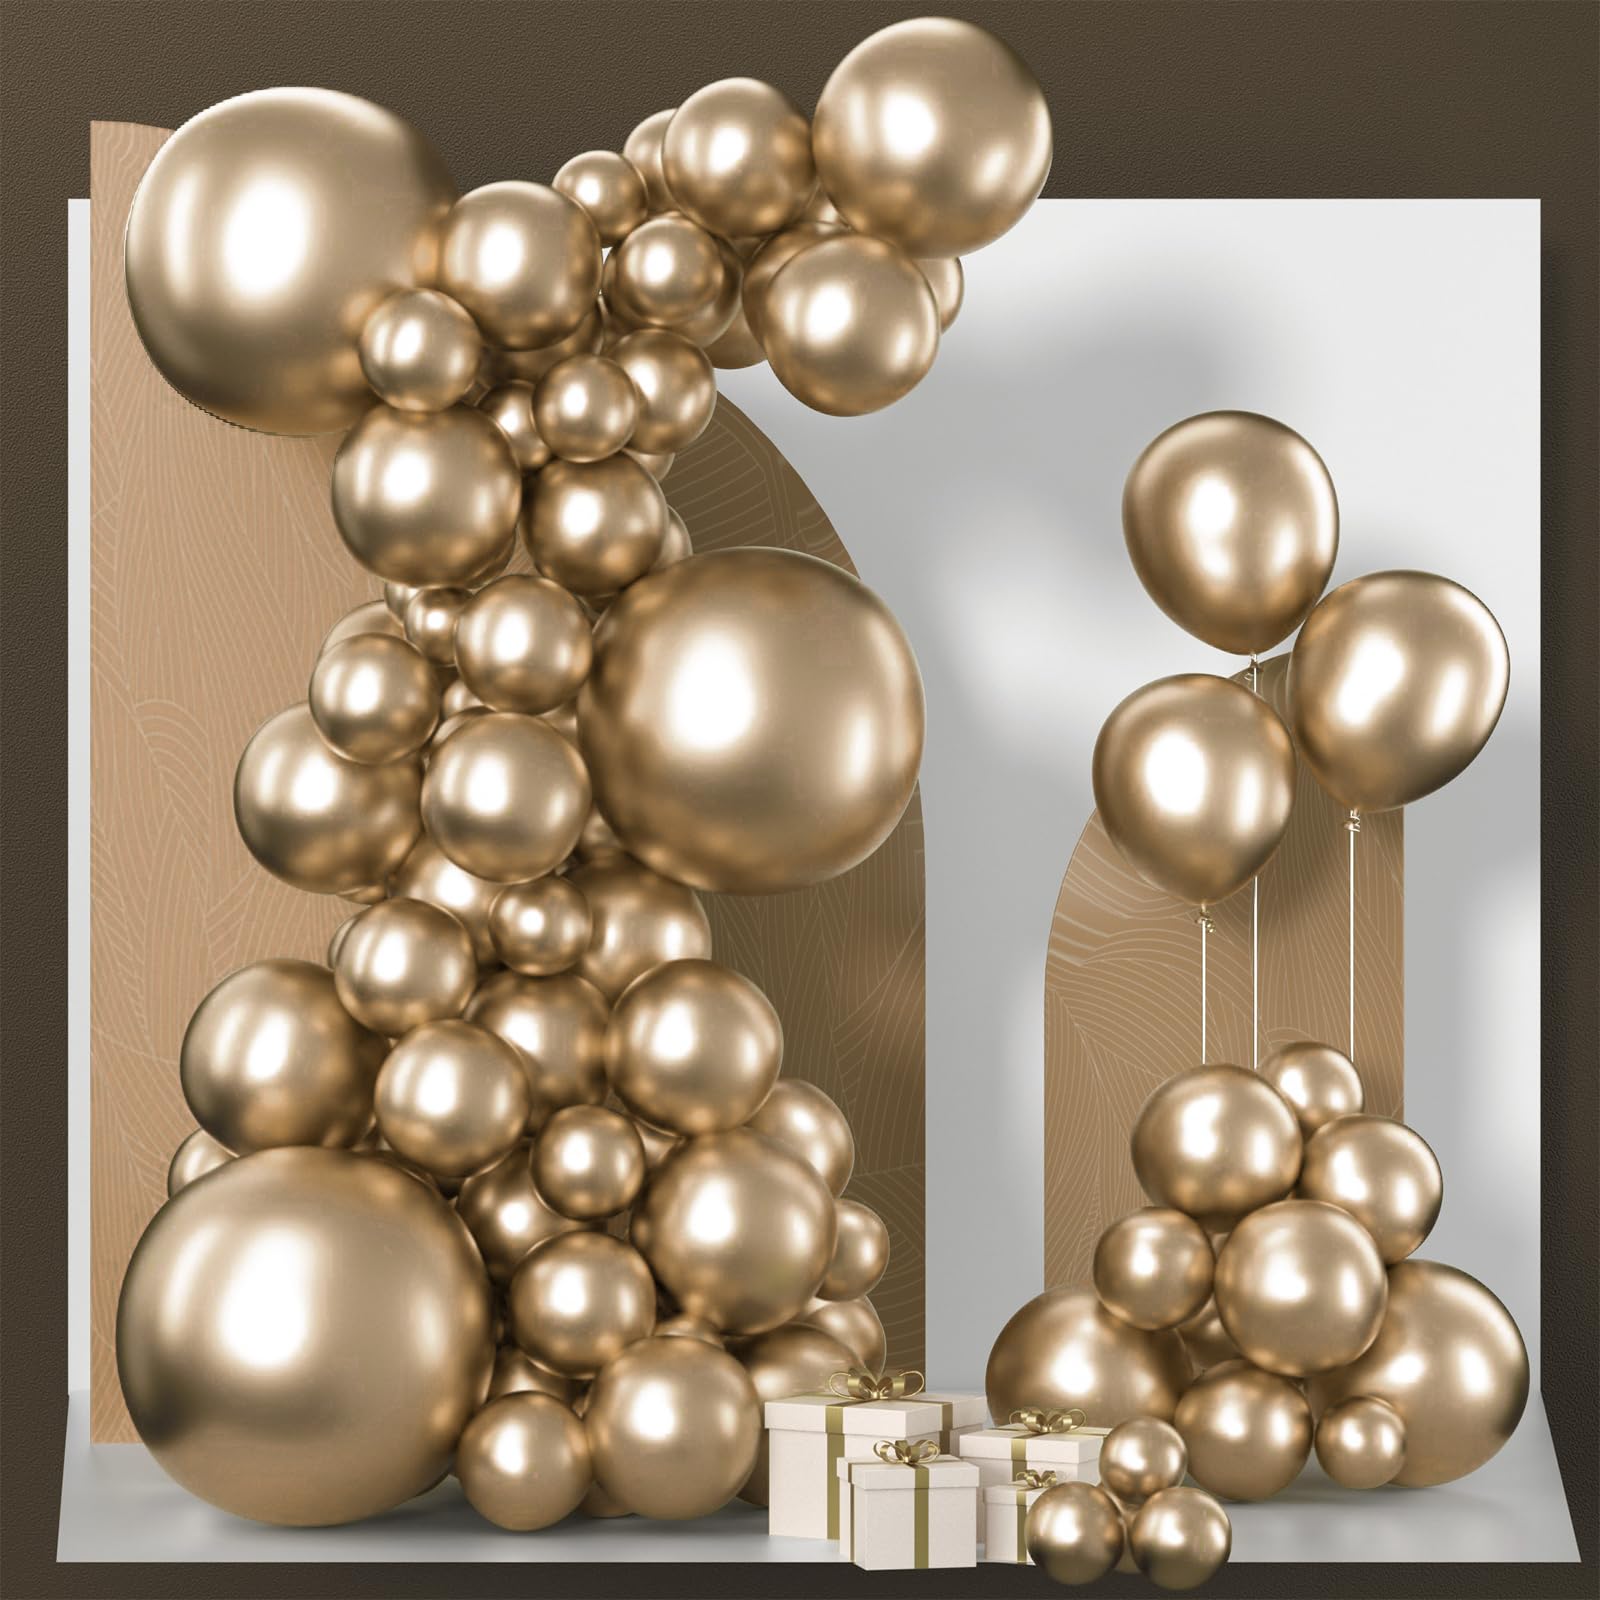 PartyWoo Chrome Gold Balloons, 100 pcs Gold Chrome Balloons Different Sizes Pack of 18 Inch 12 Inch 10 Inch 5 Inch for Balloon Garland or Balloon Arch as Birthday Decorations, Party Decorations